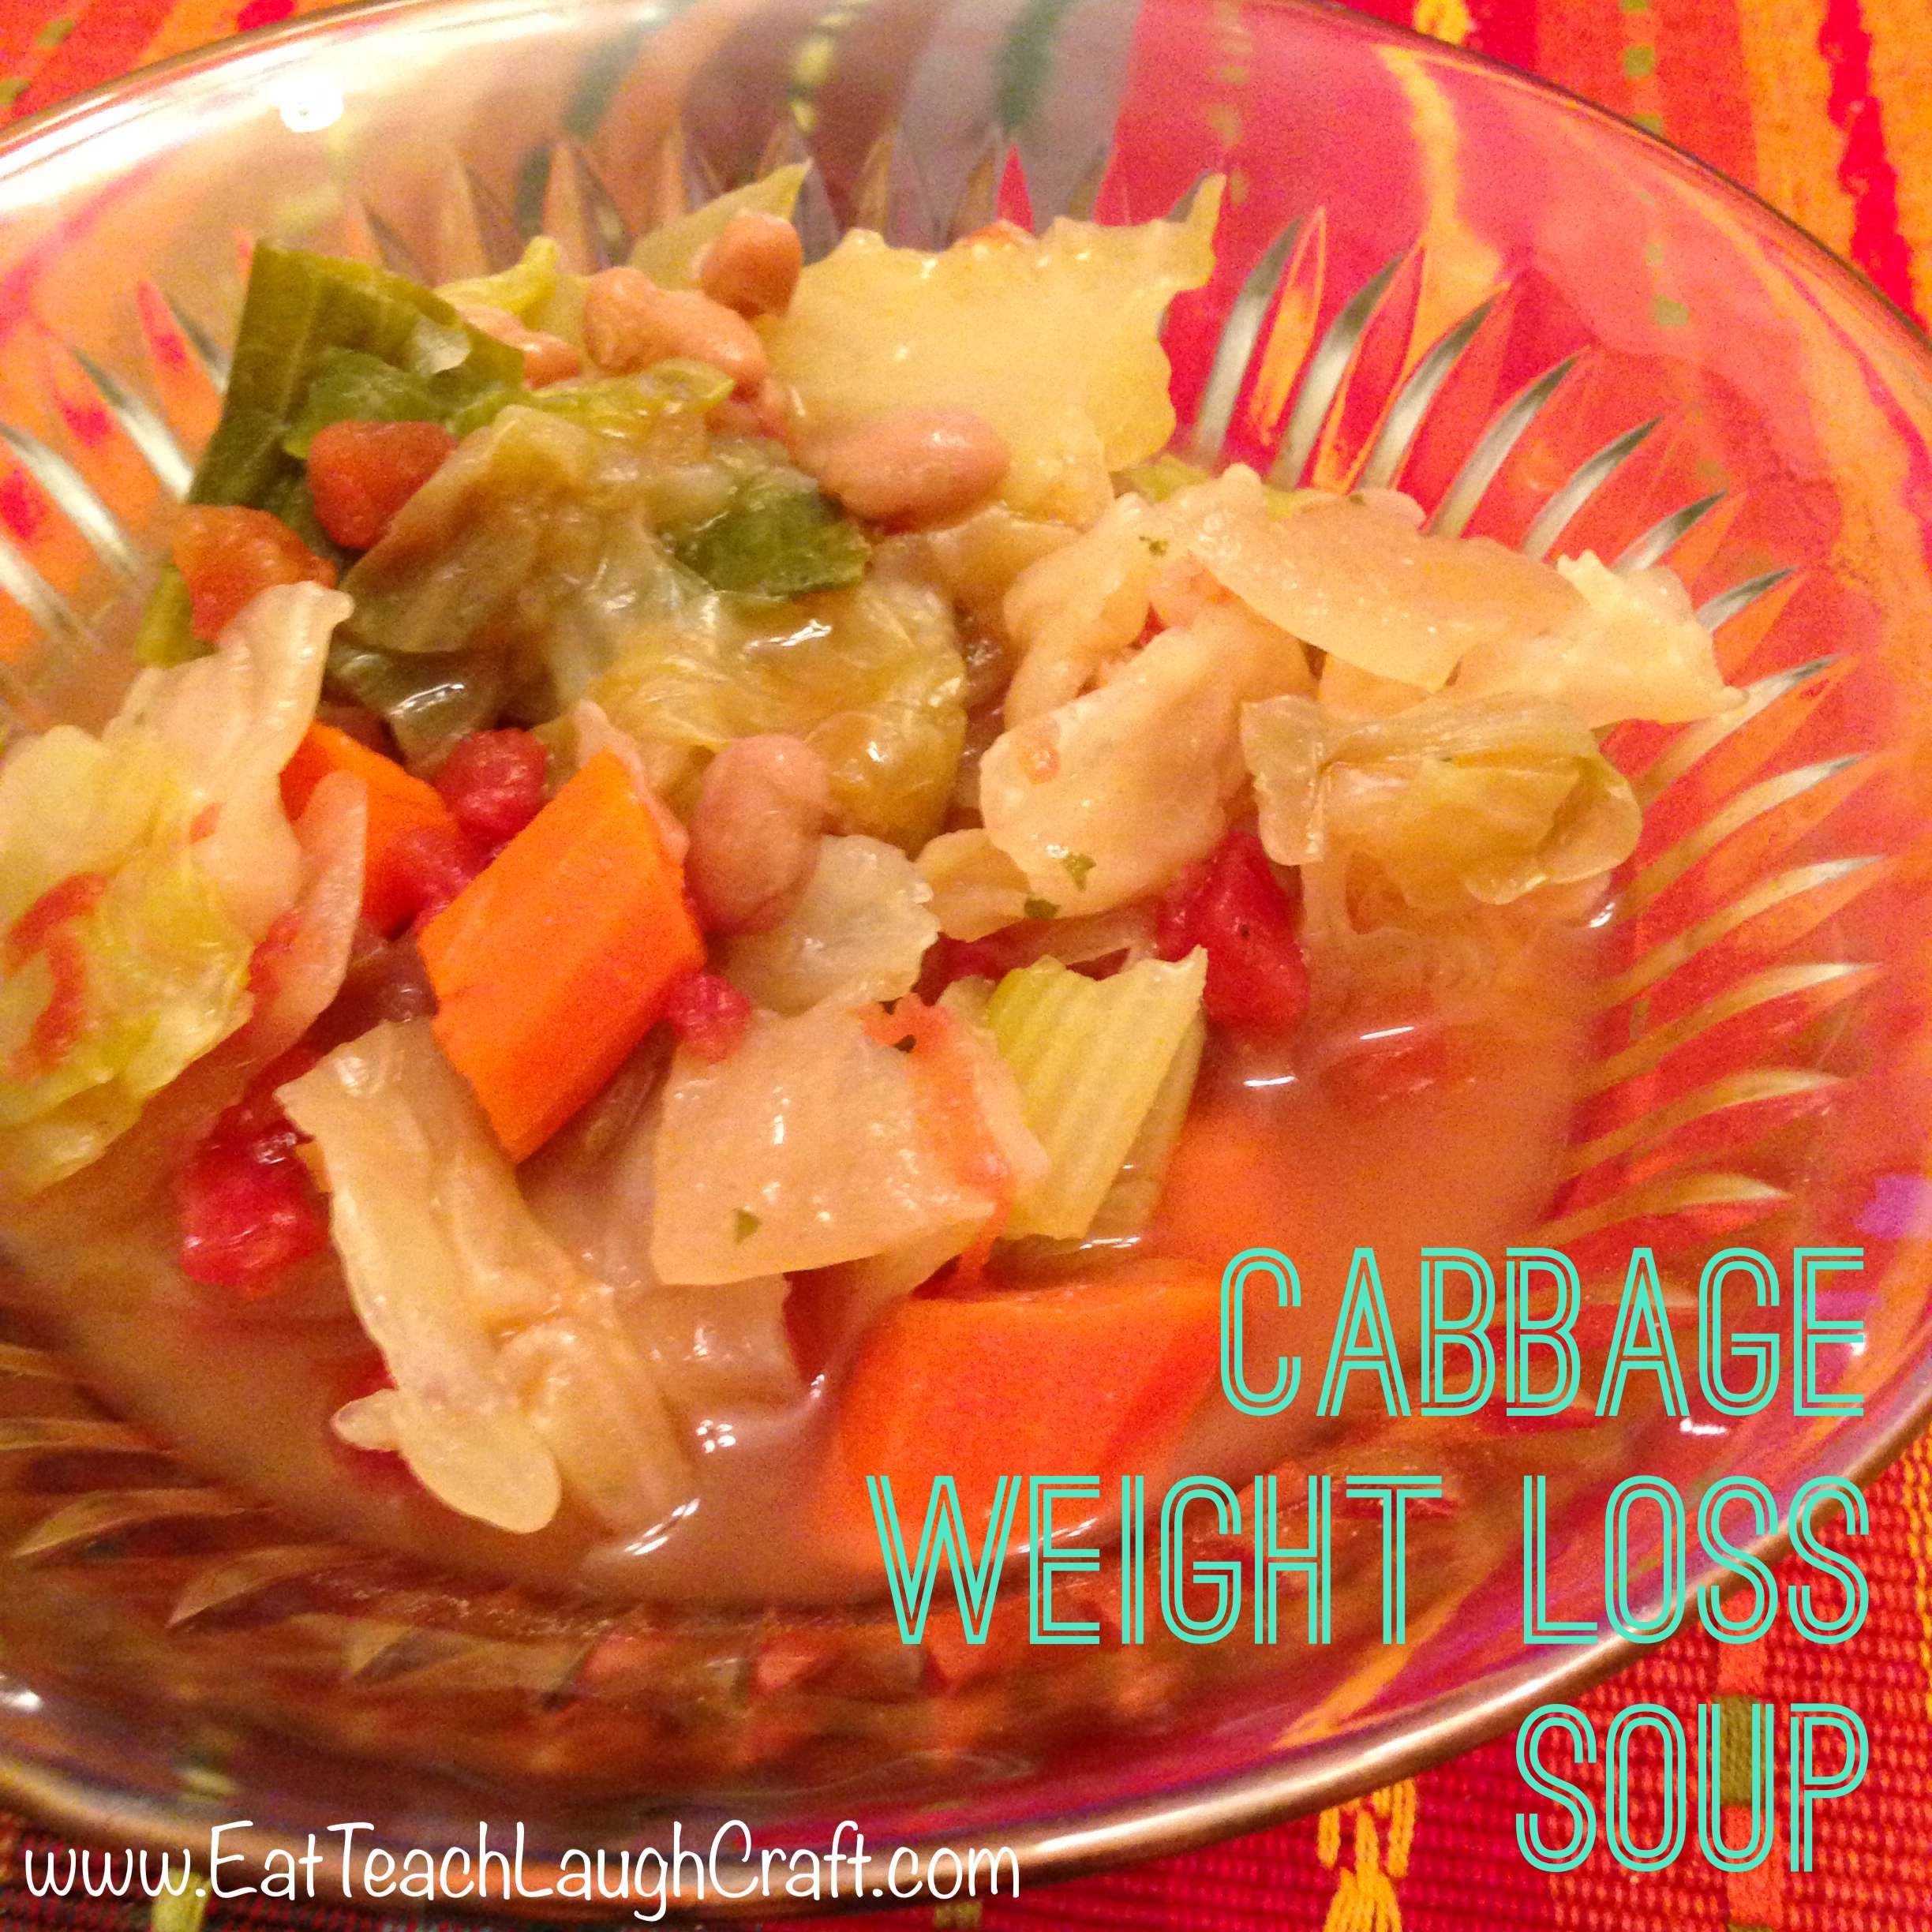 Cabbage Weight Loss Soup Recipe